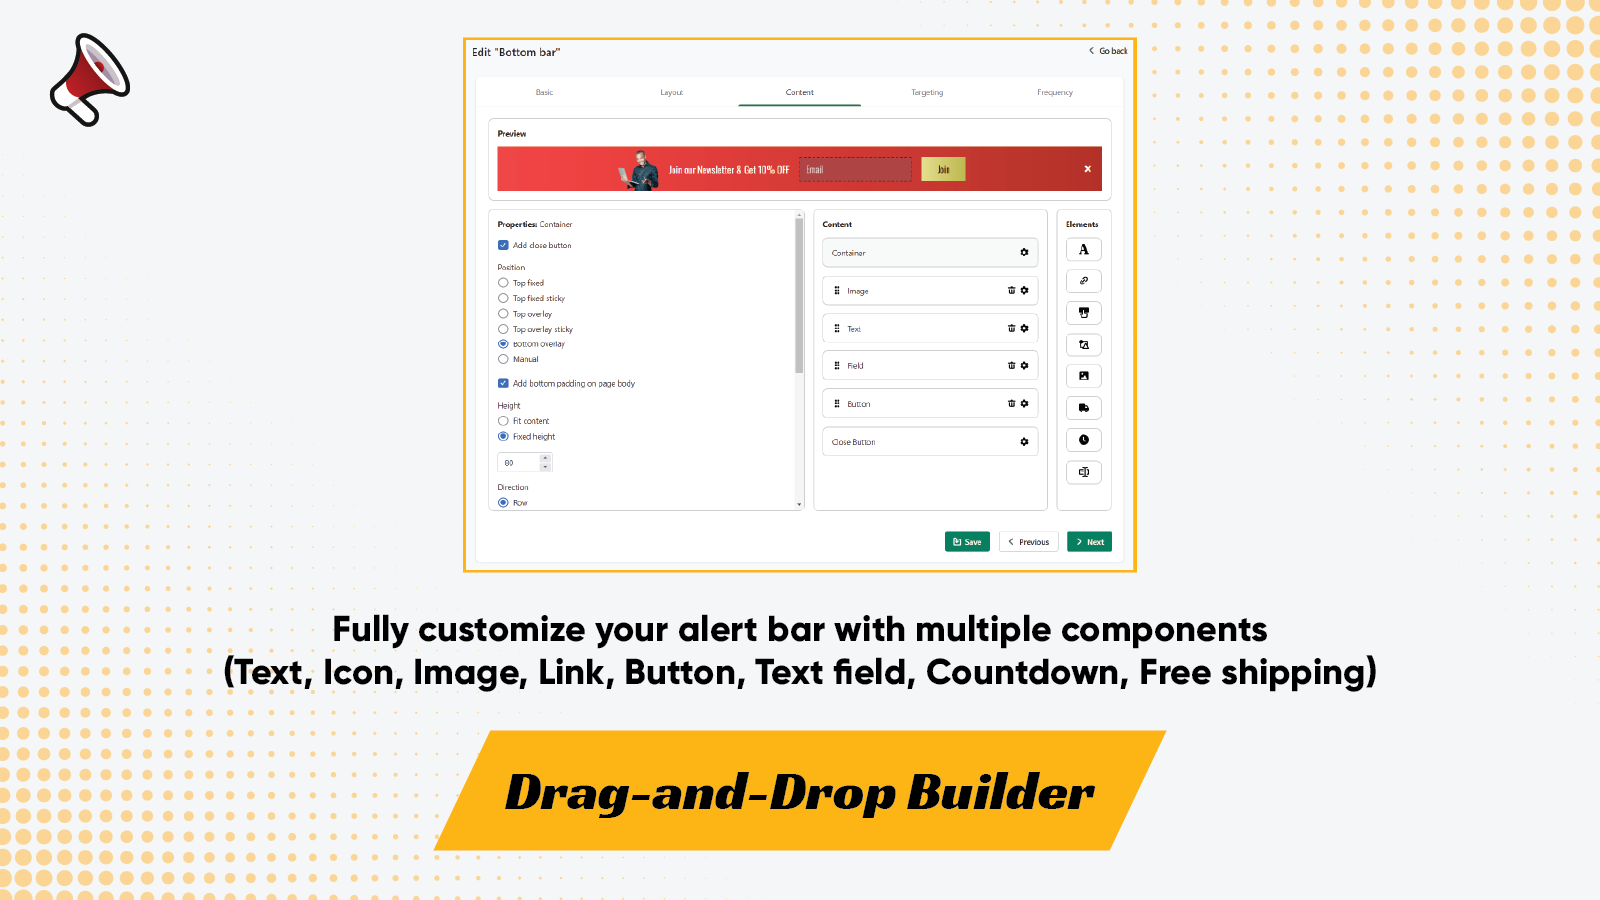 Drag-and-Drop Builder